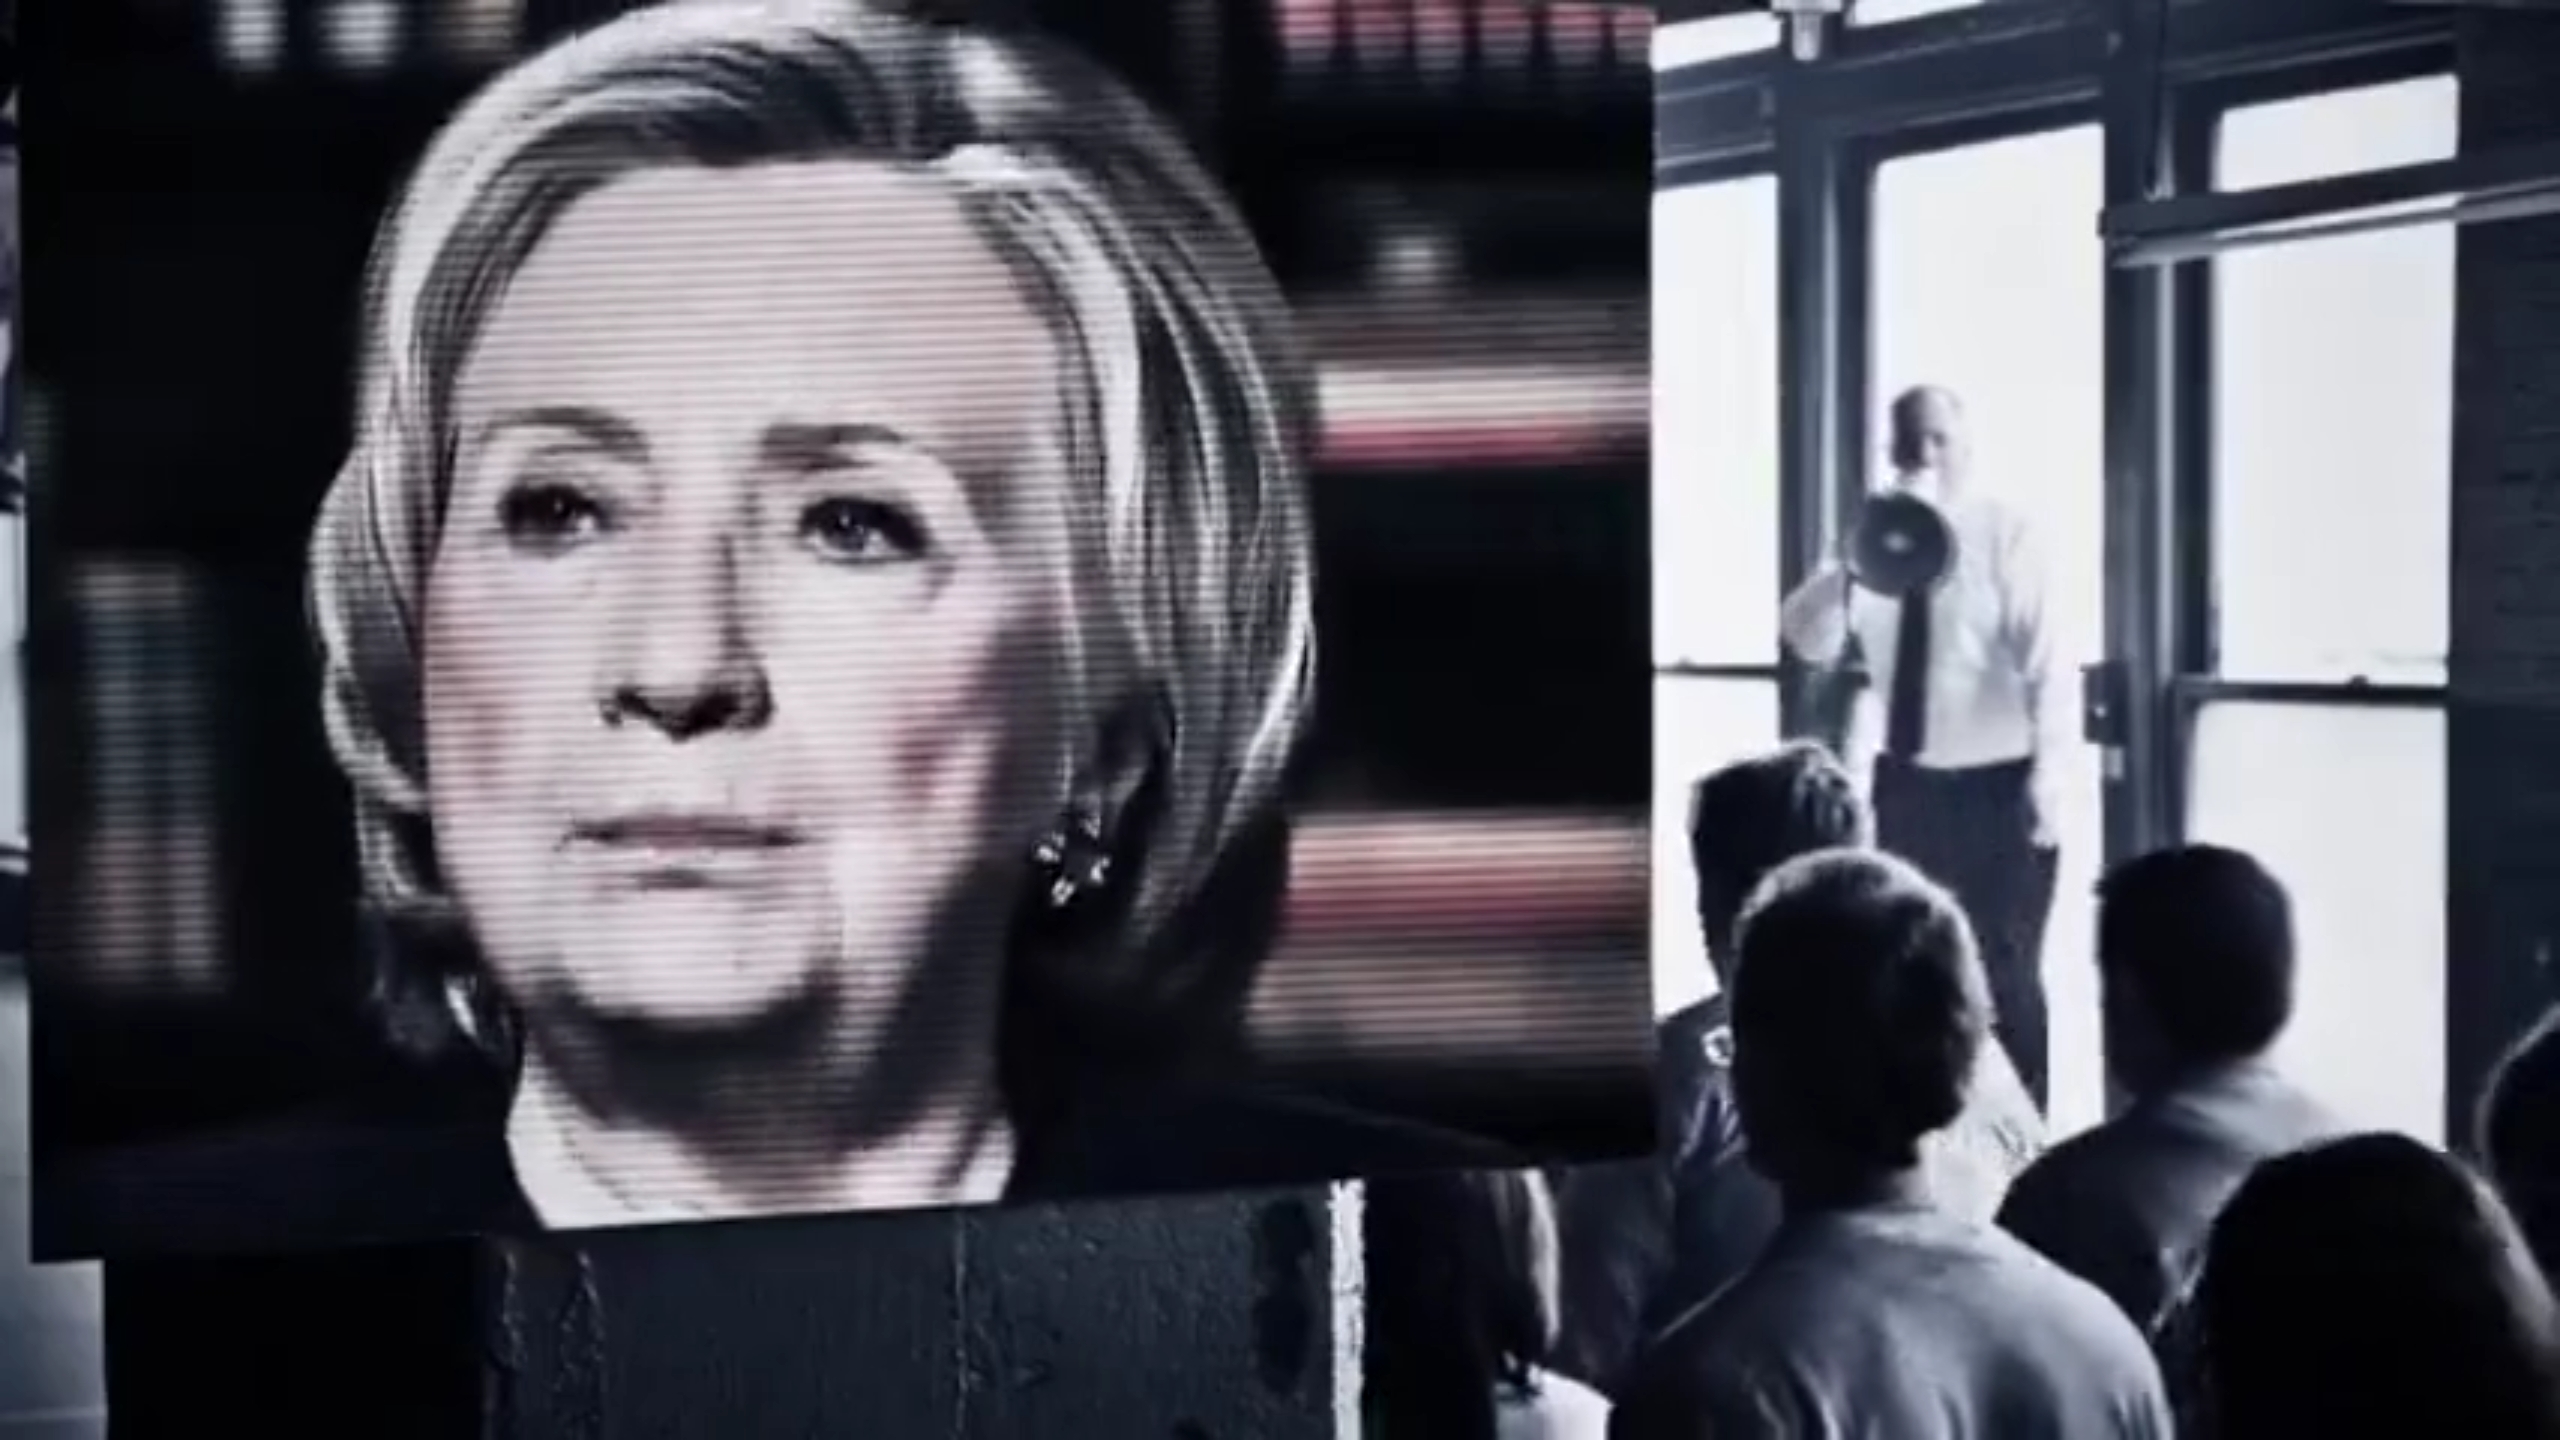 ‘BRAINWASHED’: Trump Releases New Ad Claiming Hillary Clinton Is Brainwashing Voters For Biden